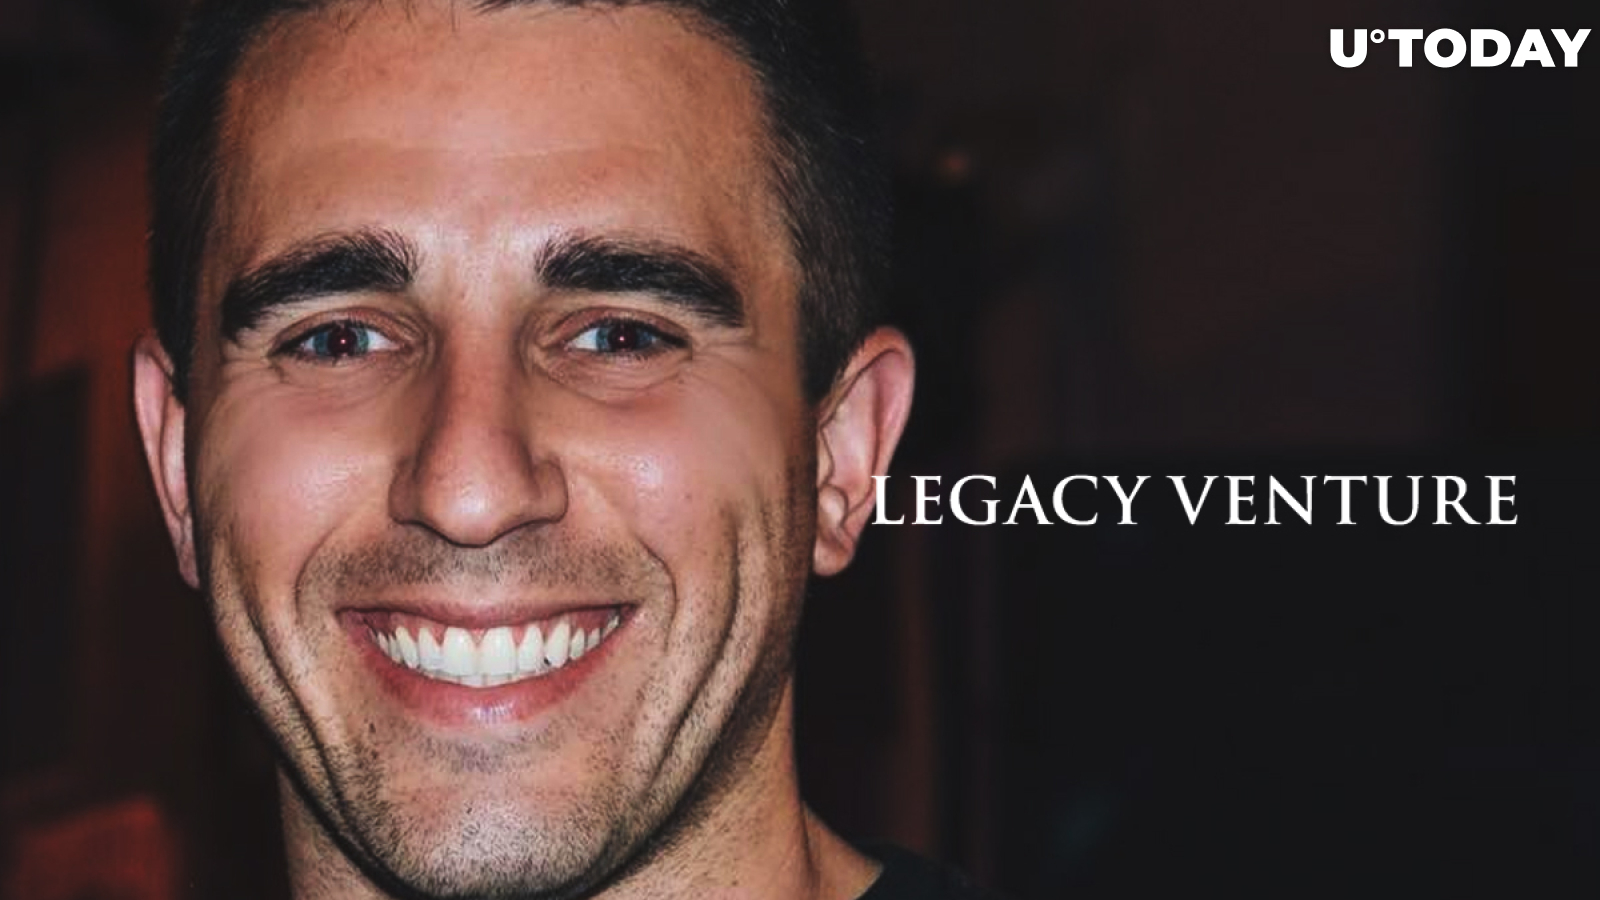 Anthony Pompliano's "Very Legacy" Venture Fund Criticized for Not Accepting Crypto